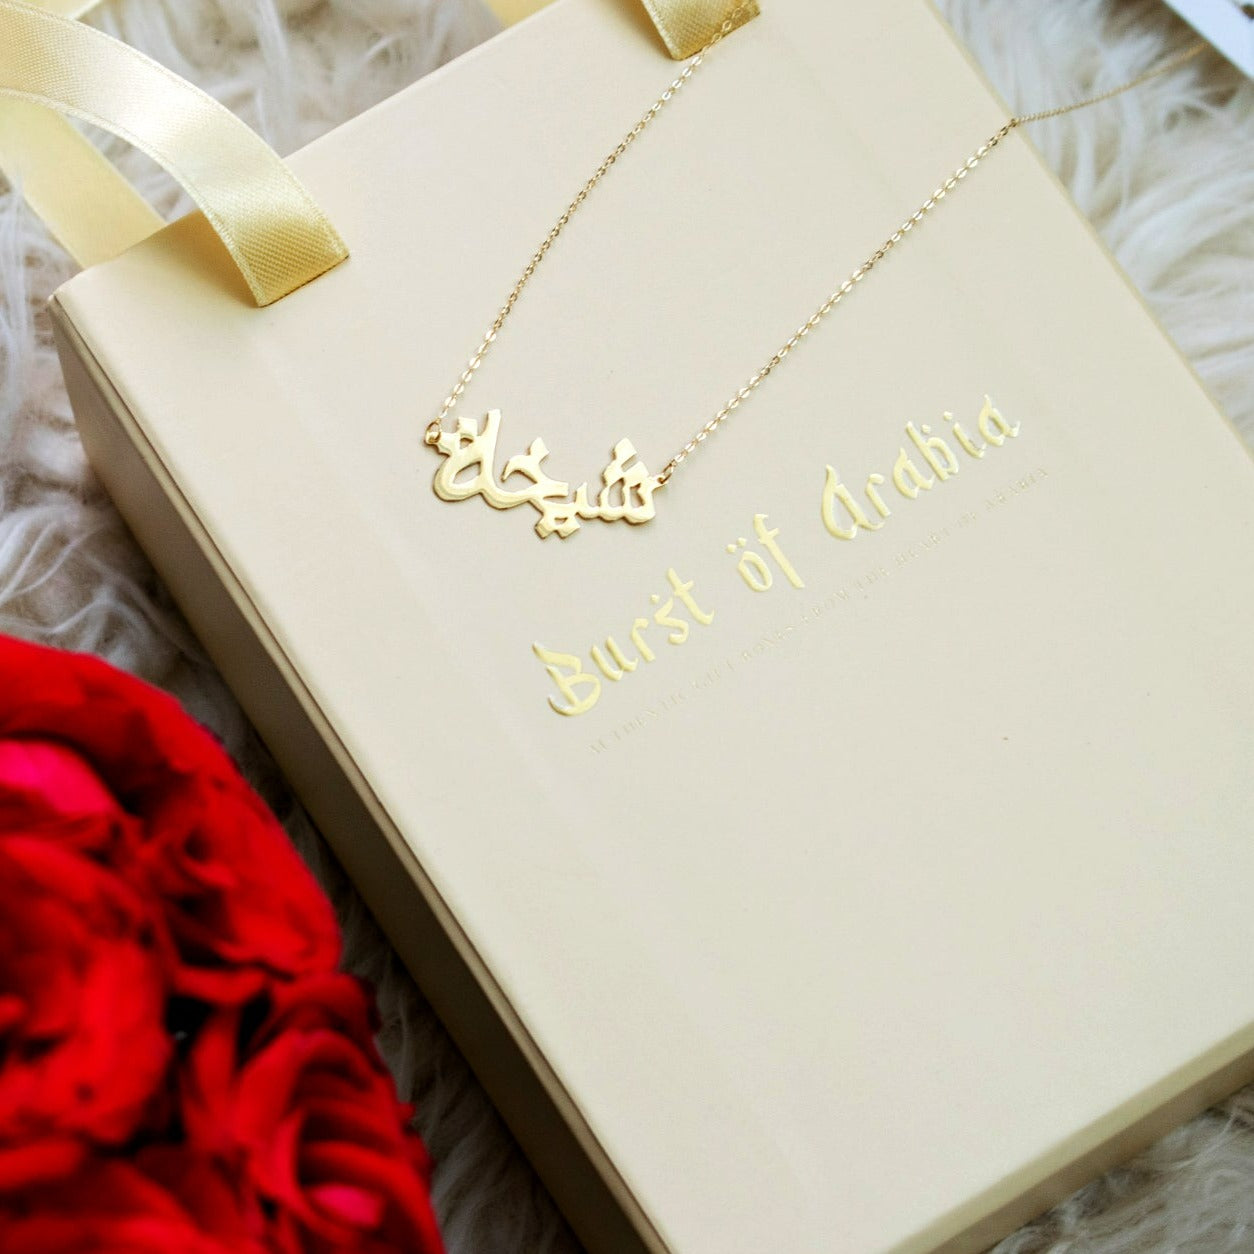 This exquisite 18 carat gold birthstone necklace is a beautiful symbol of love. It includes a dainty gemstone and a personalized letter pendant, making it a heartfelt gift for your beloved.